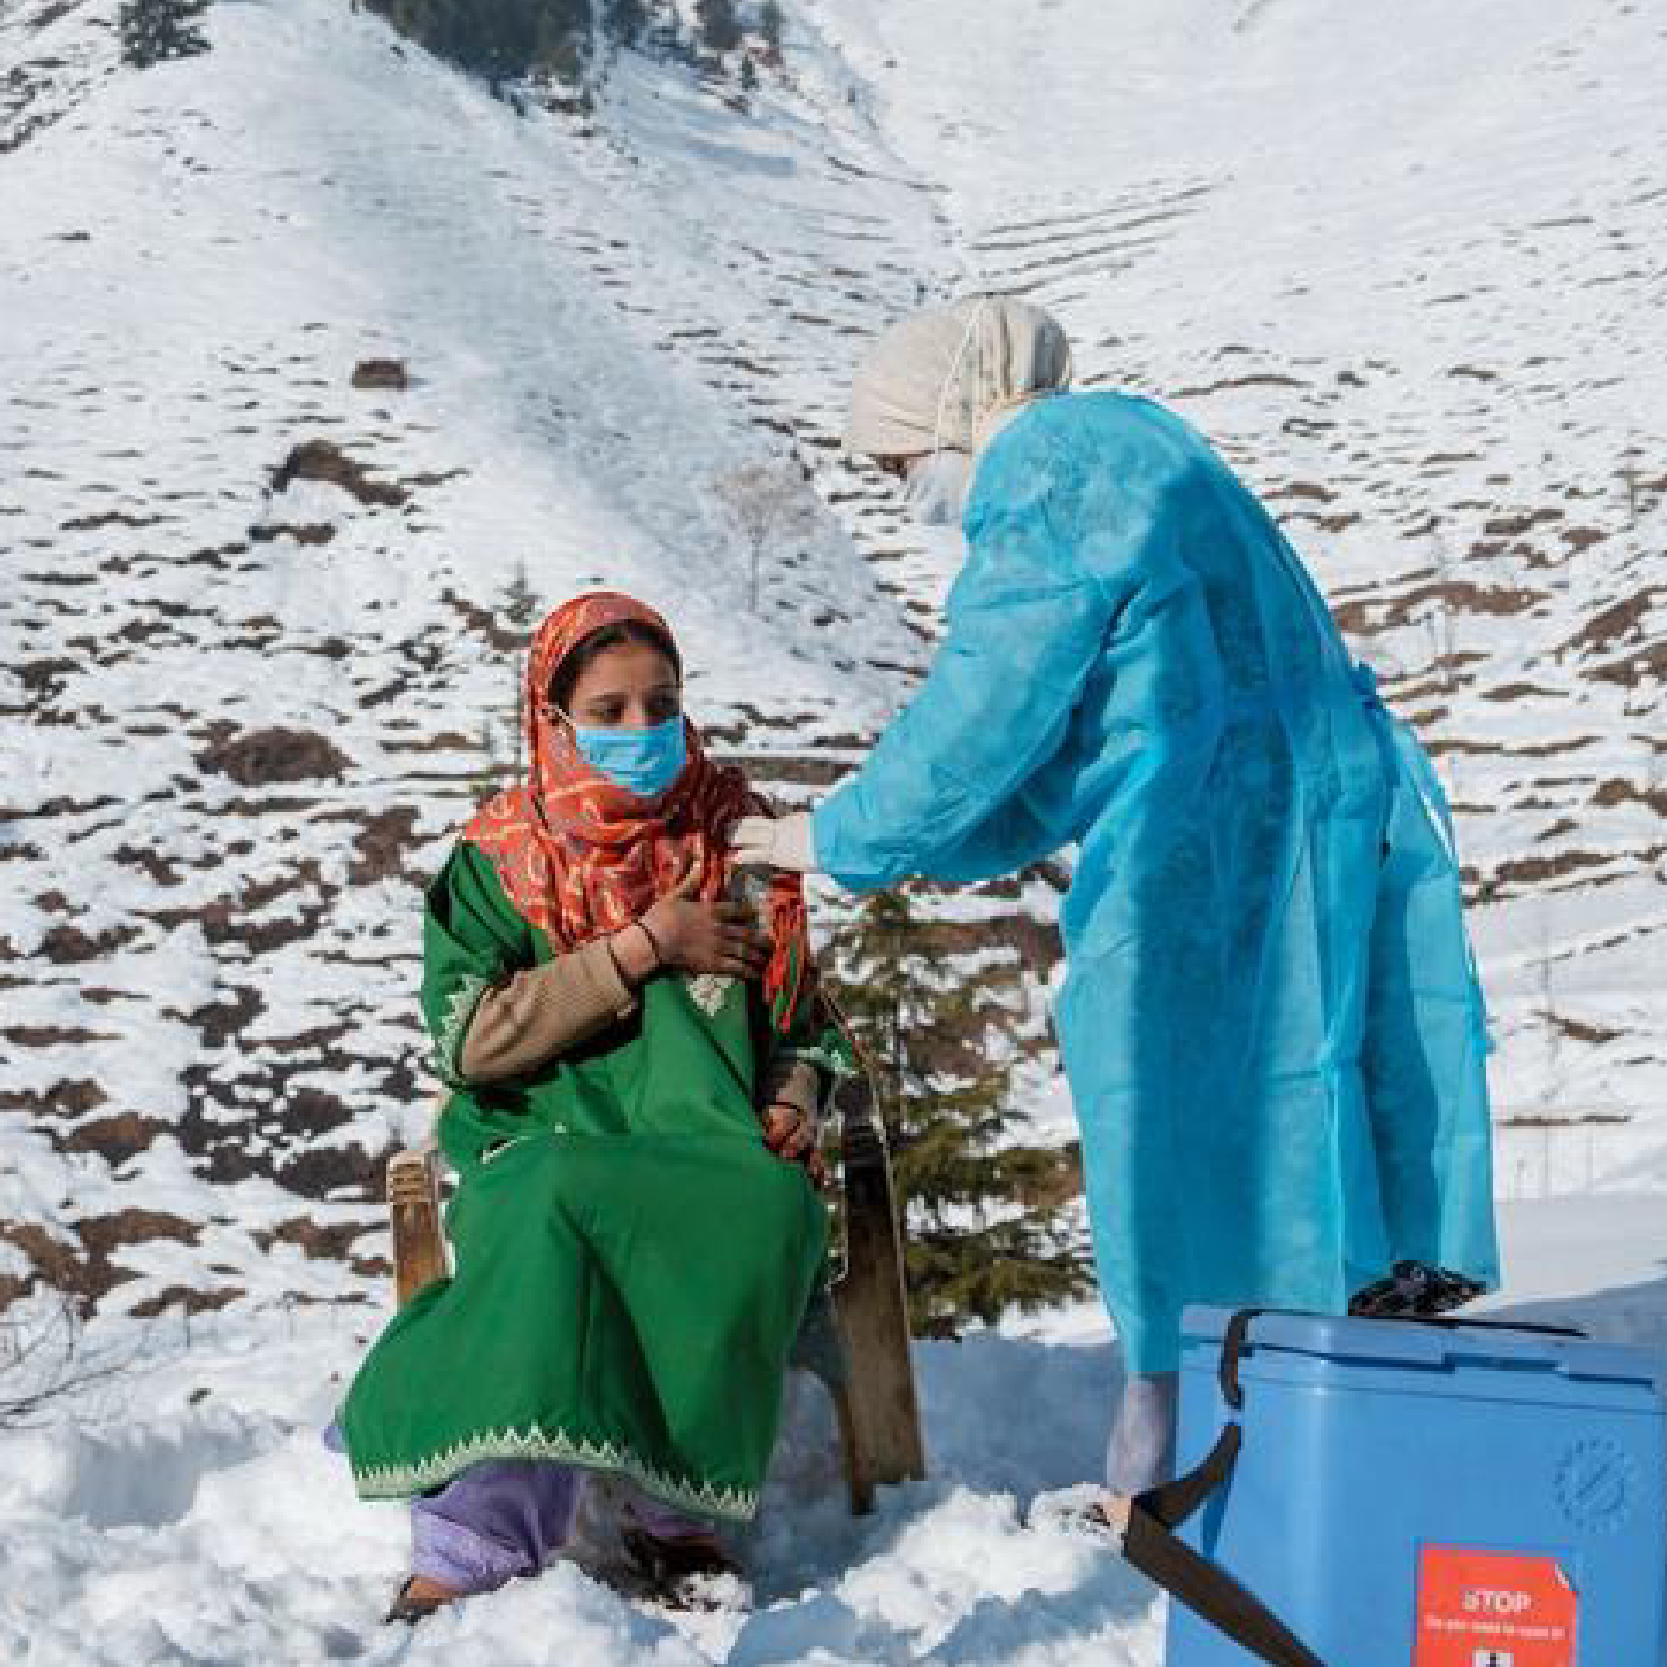 A healthcare worker from a clinic in North Kashmir braves freezing temperatures and snow to vaccinate people living in remote areas of India.